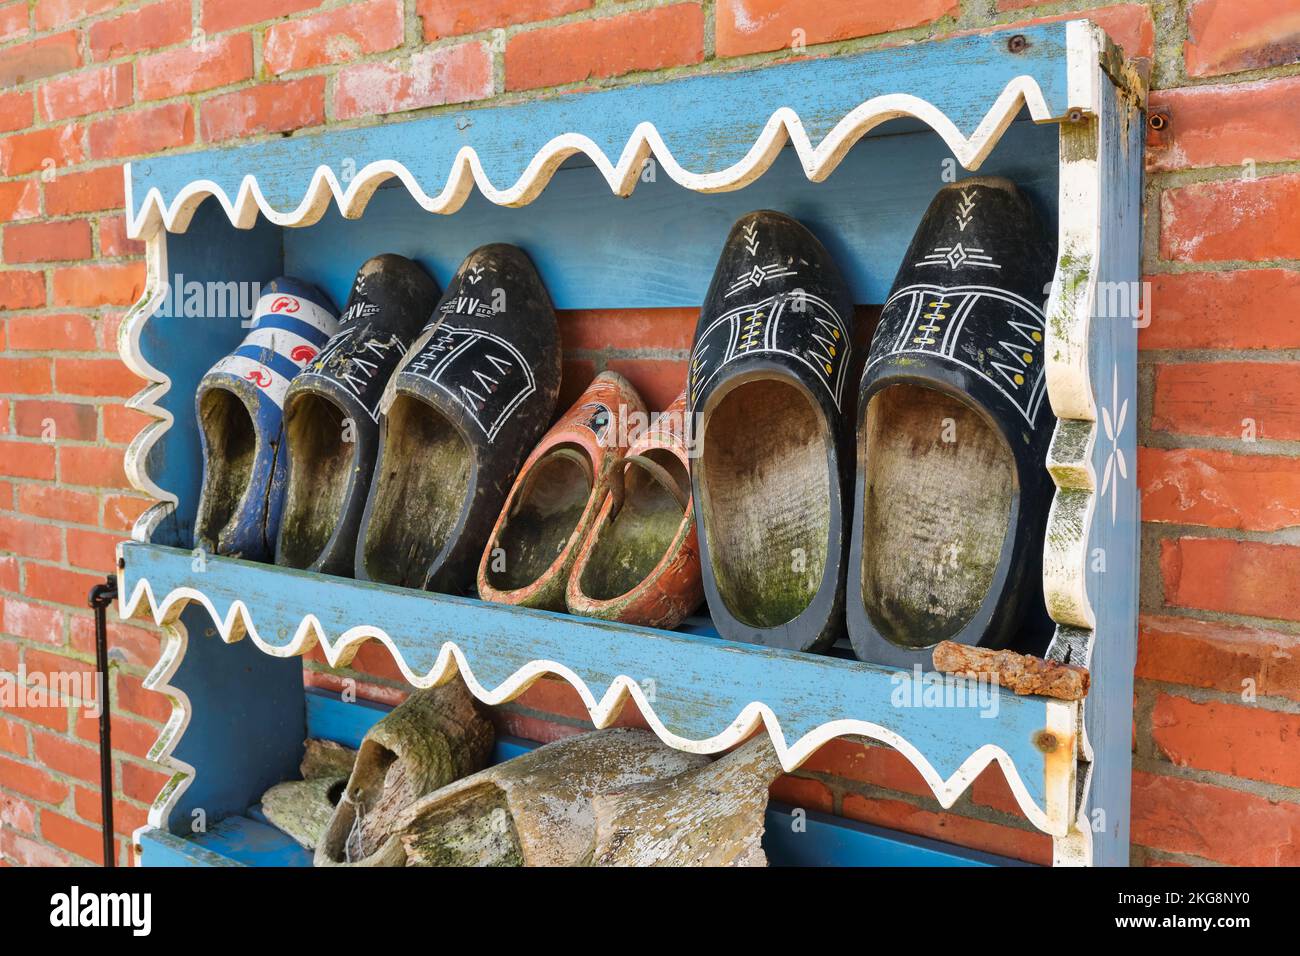 Old worn-out Dutch clogs or wooden shoes in a rack on a red brick wall Stock Photo